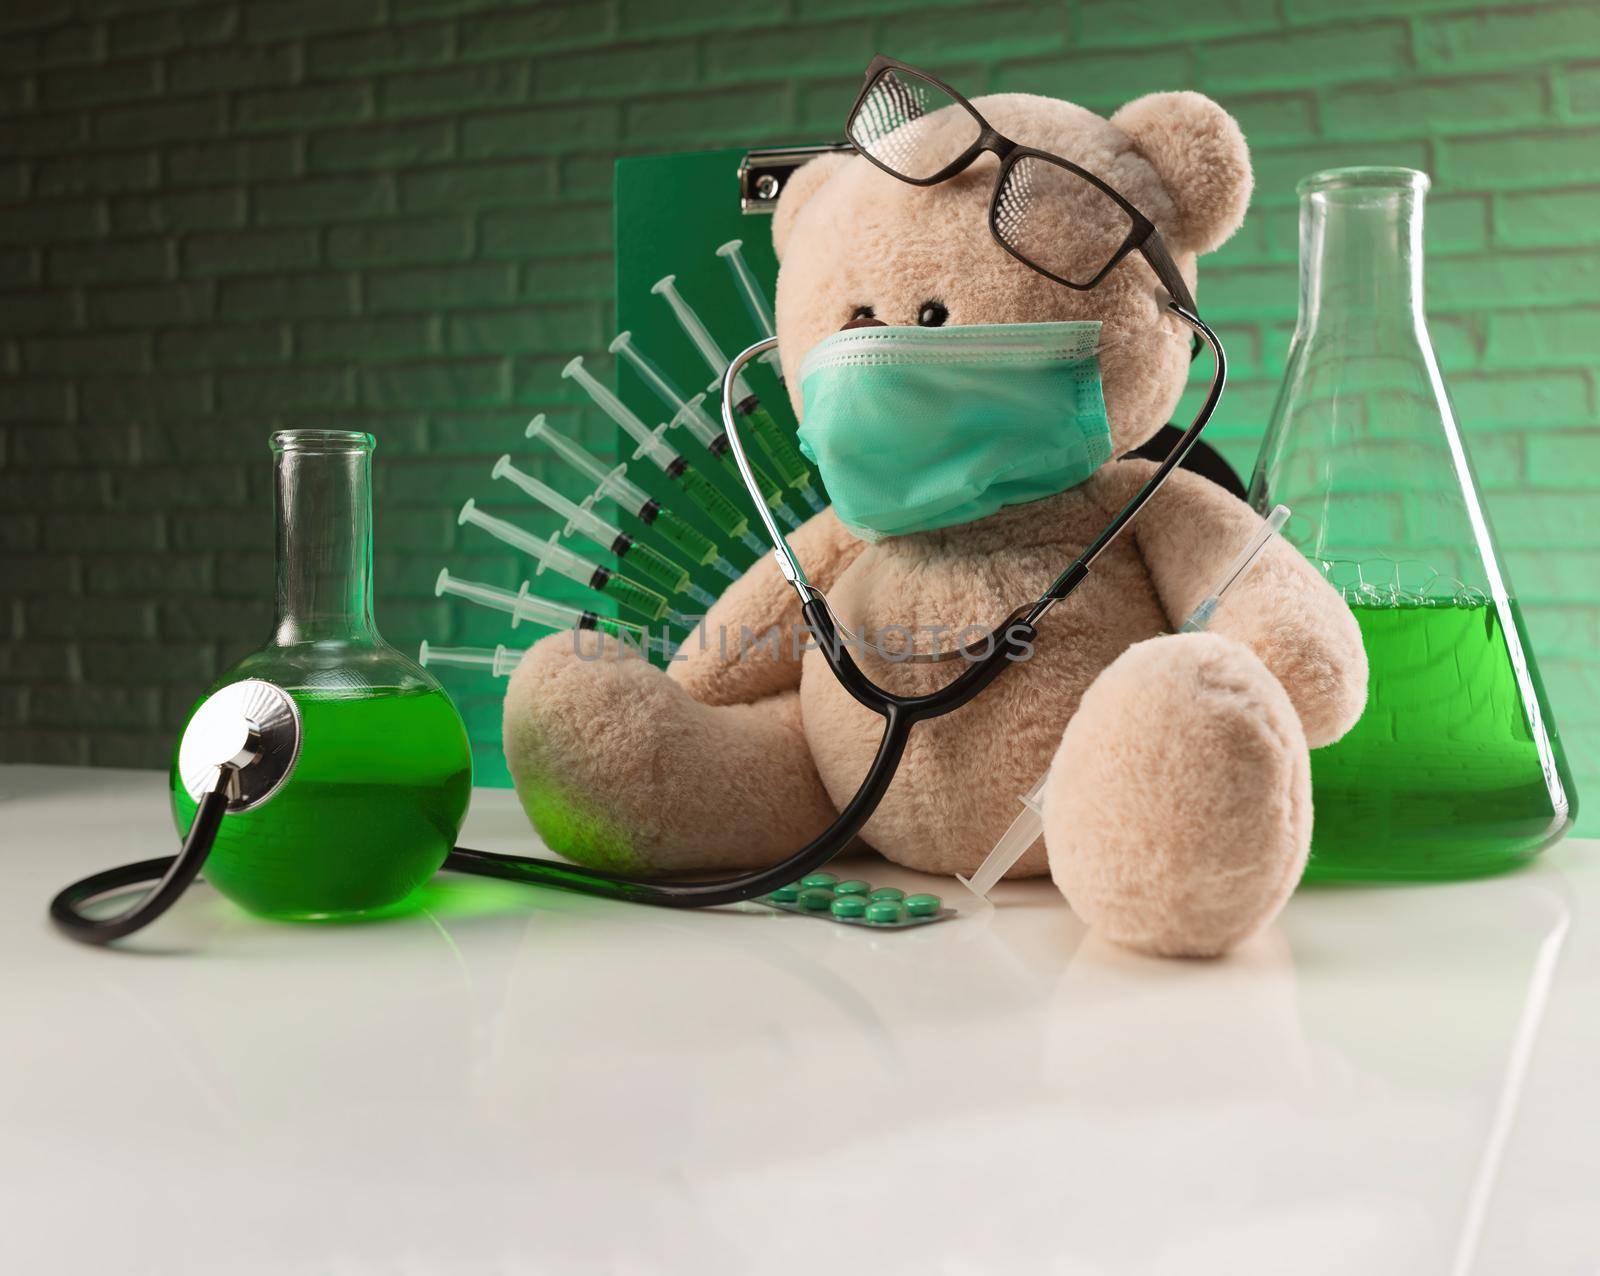 injections and vaccinations in the hospital creative picture with a teddy bear by Rotozey